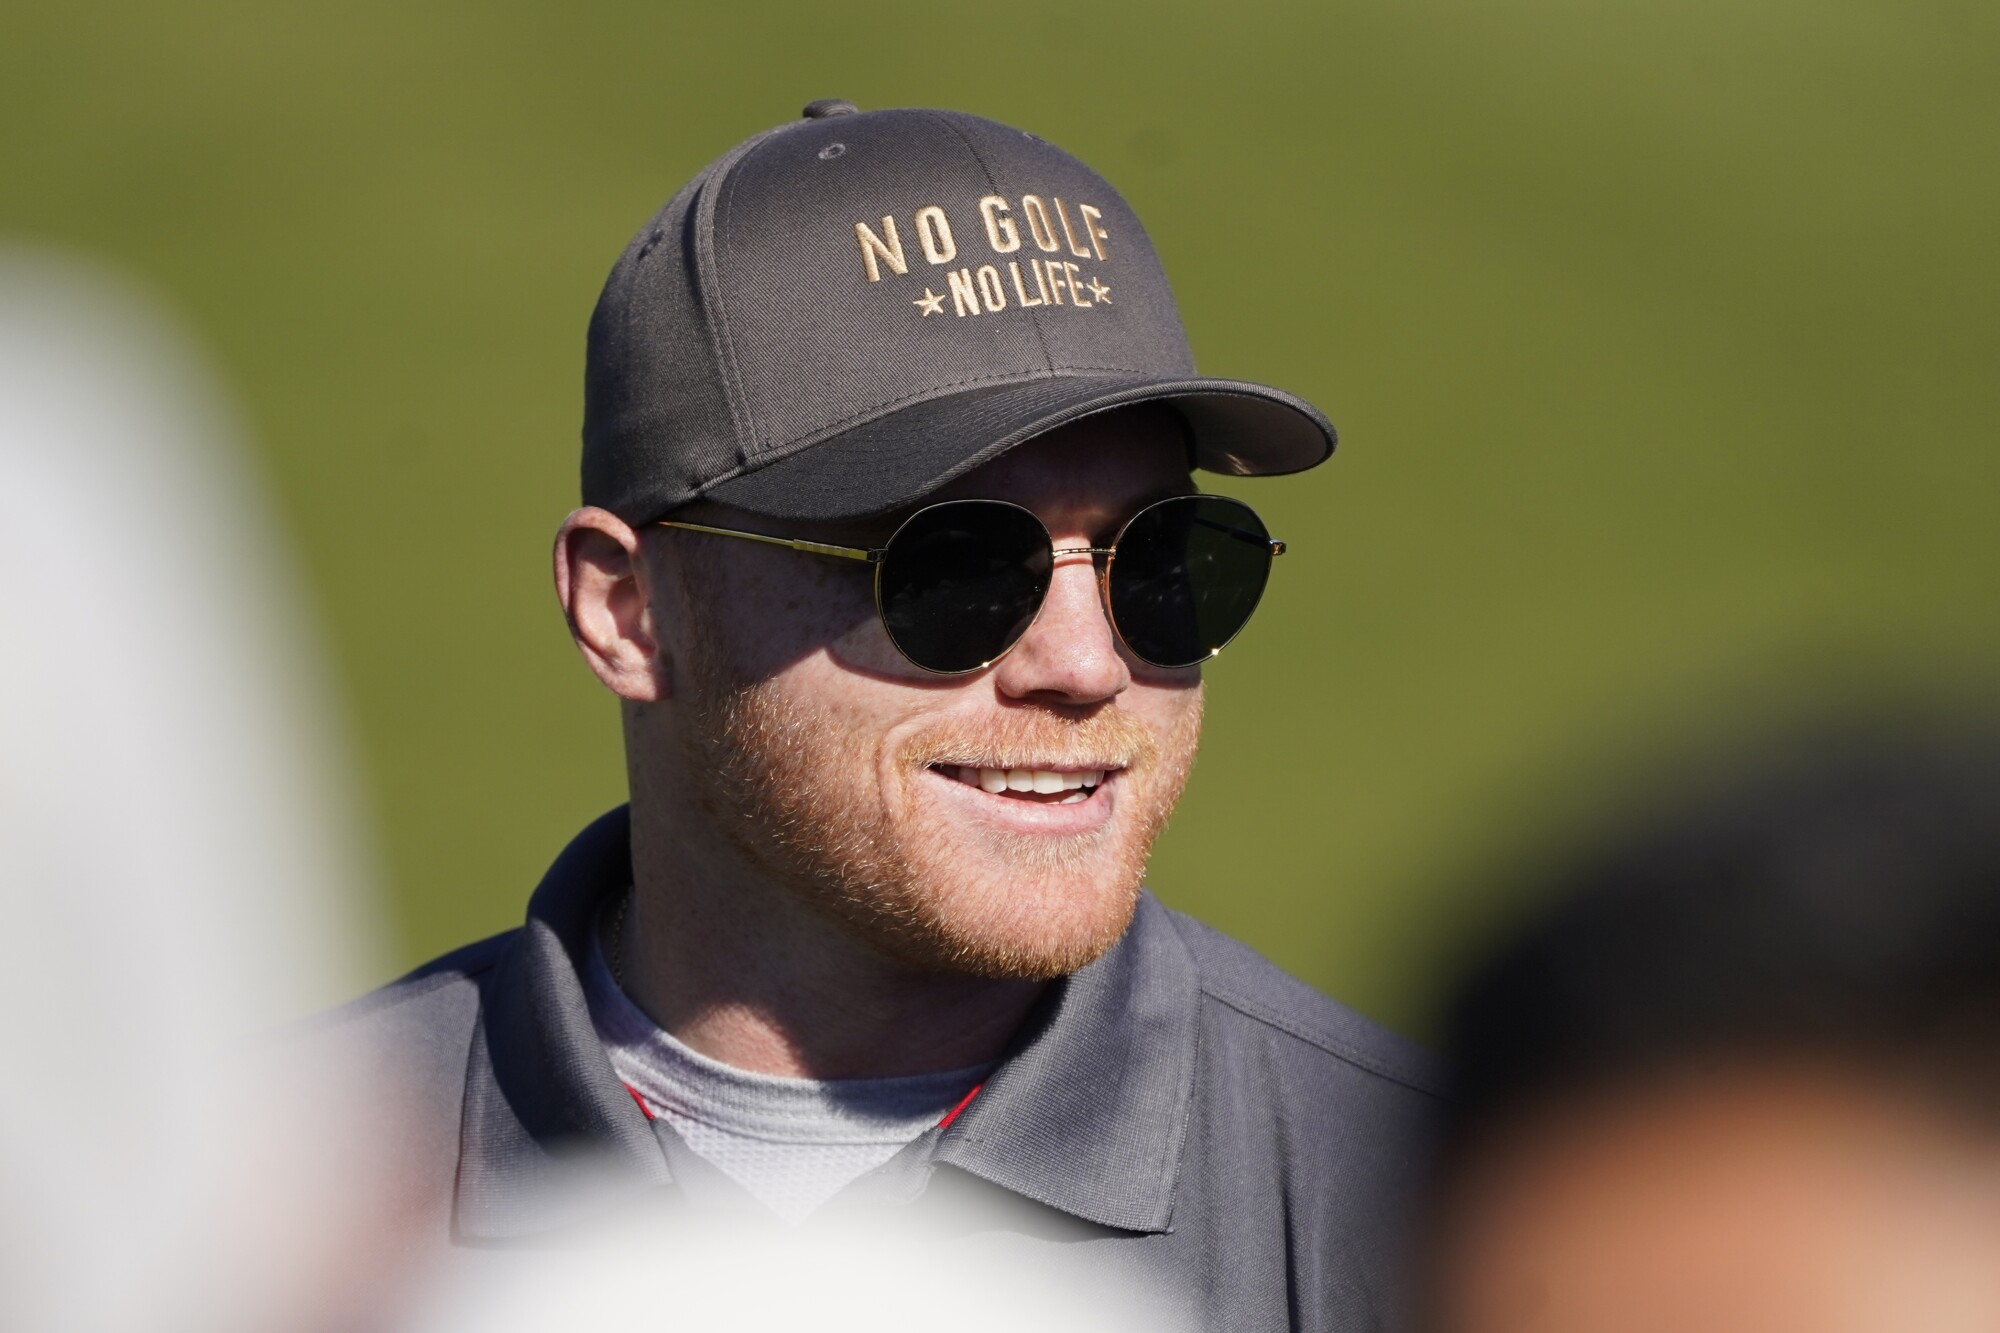 Canelo Alvarez smiles as he competes in the AT&T Pebble Beach Pro-Am in February.